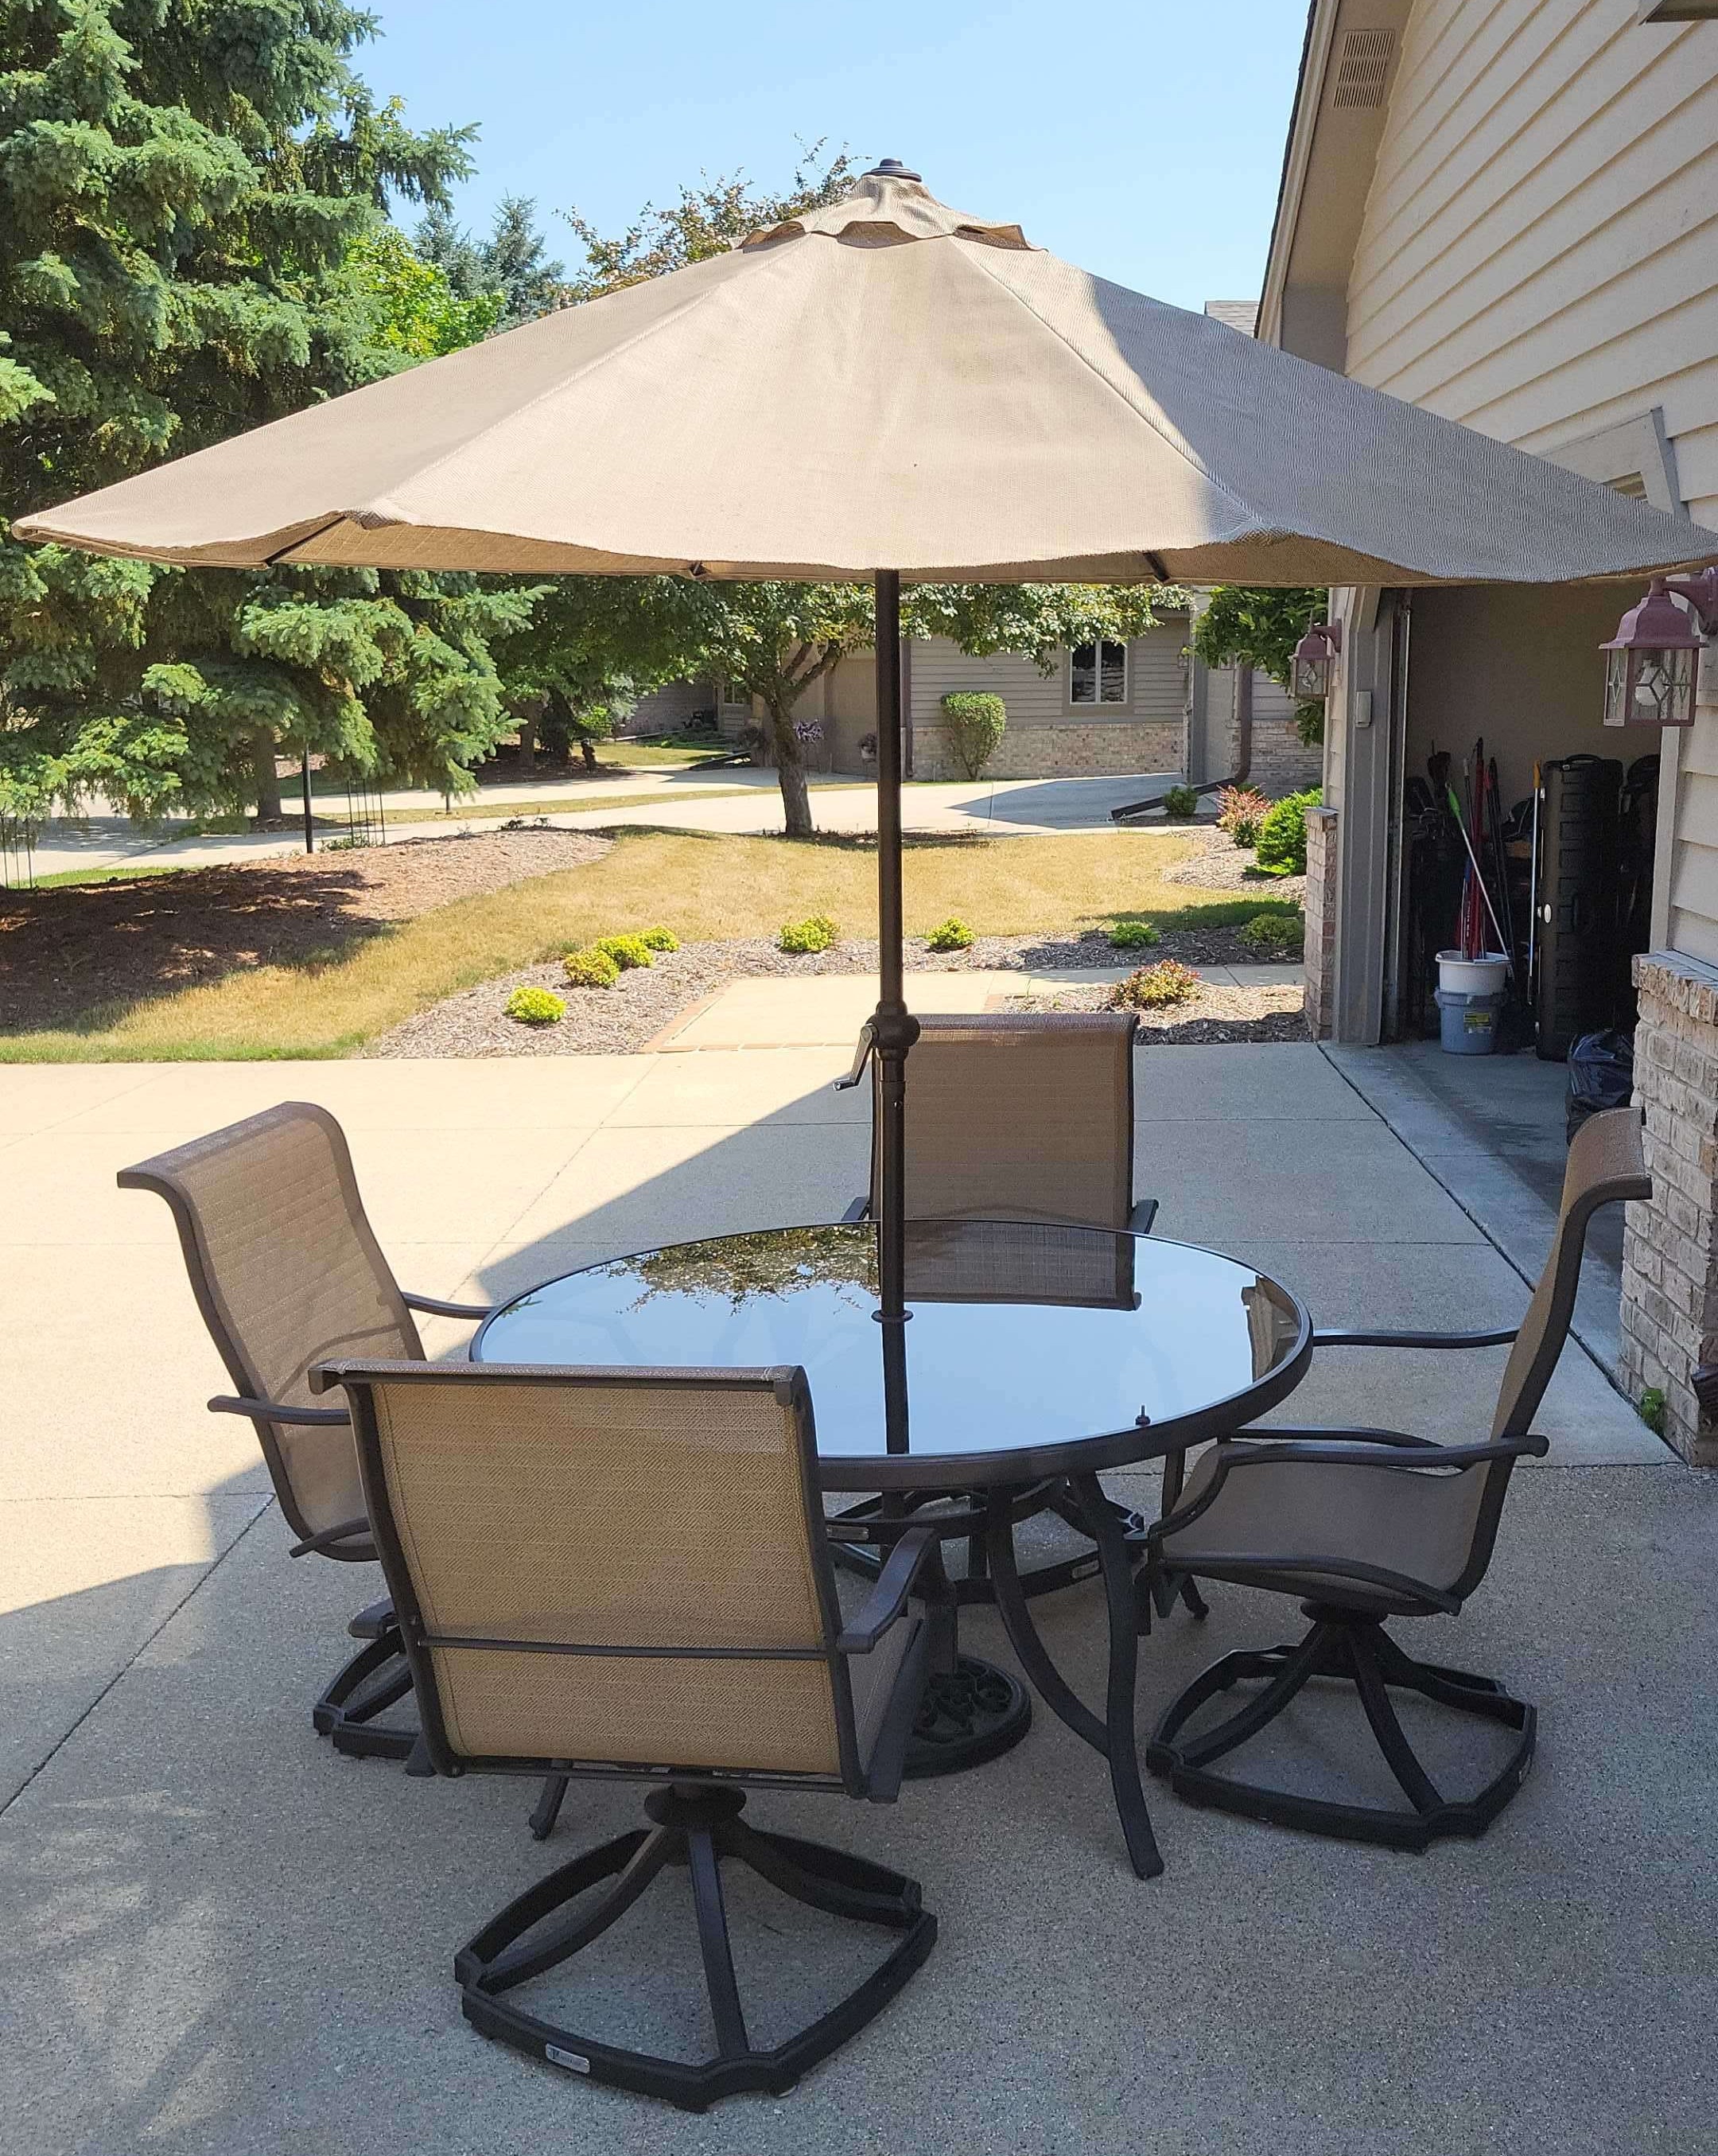 Patiologic-Table-Umbrella-Chairs-G